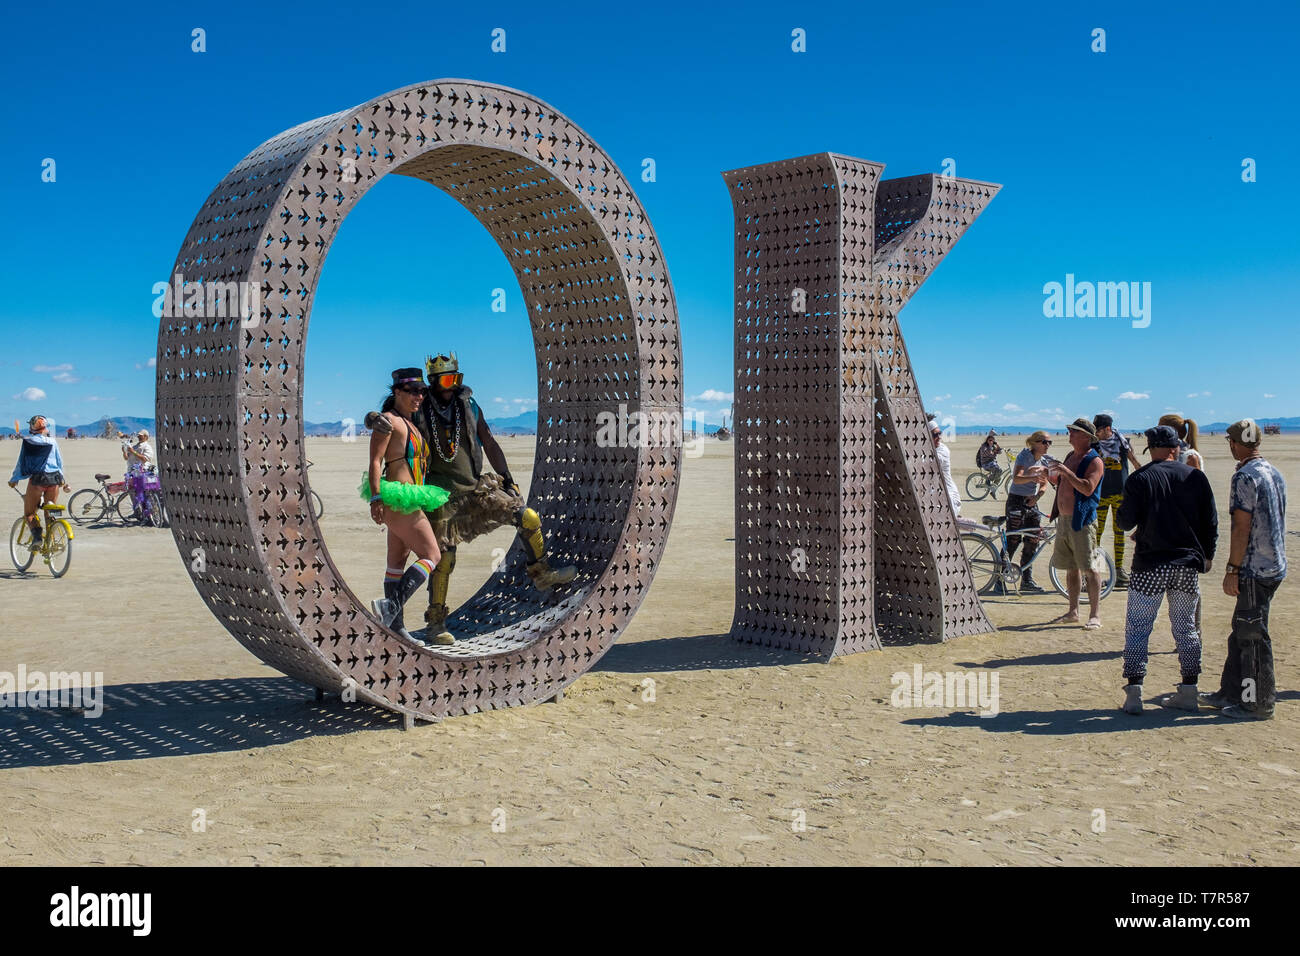 Burning Man, Nevada, USA, September, 6, 2015: Attendees at Burning Man festival standing on and around an artwork of letters that spell out the word, OK against a bright blue sky Stock Photo